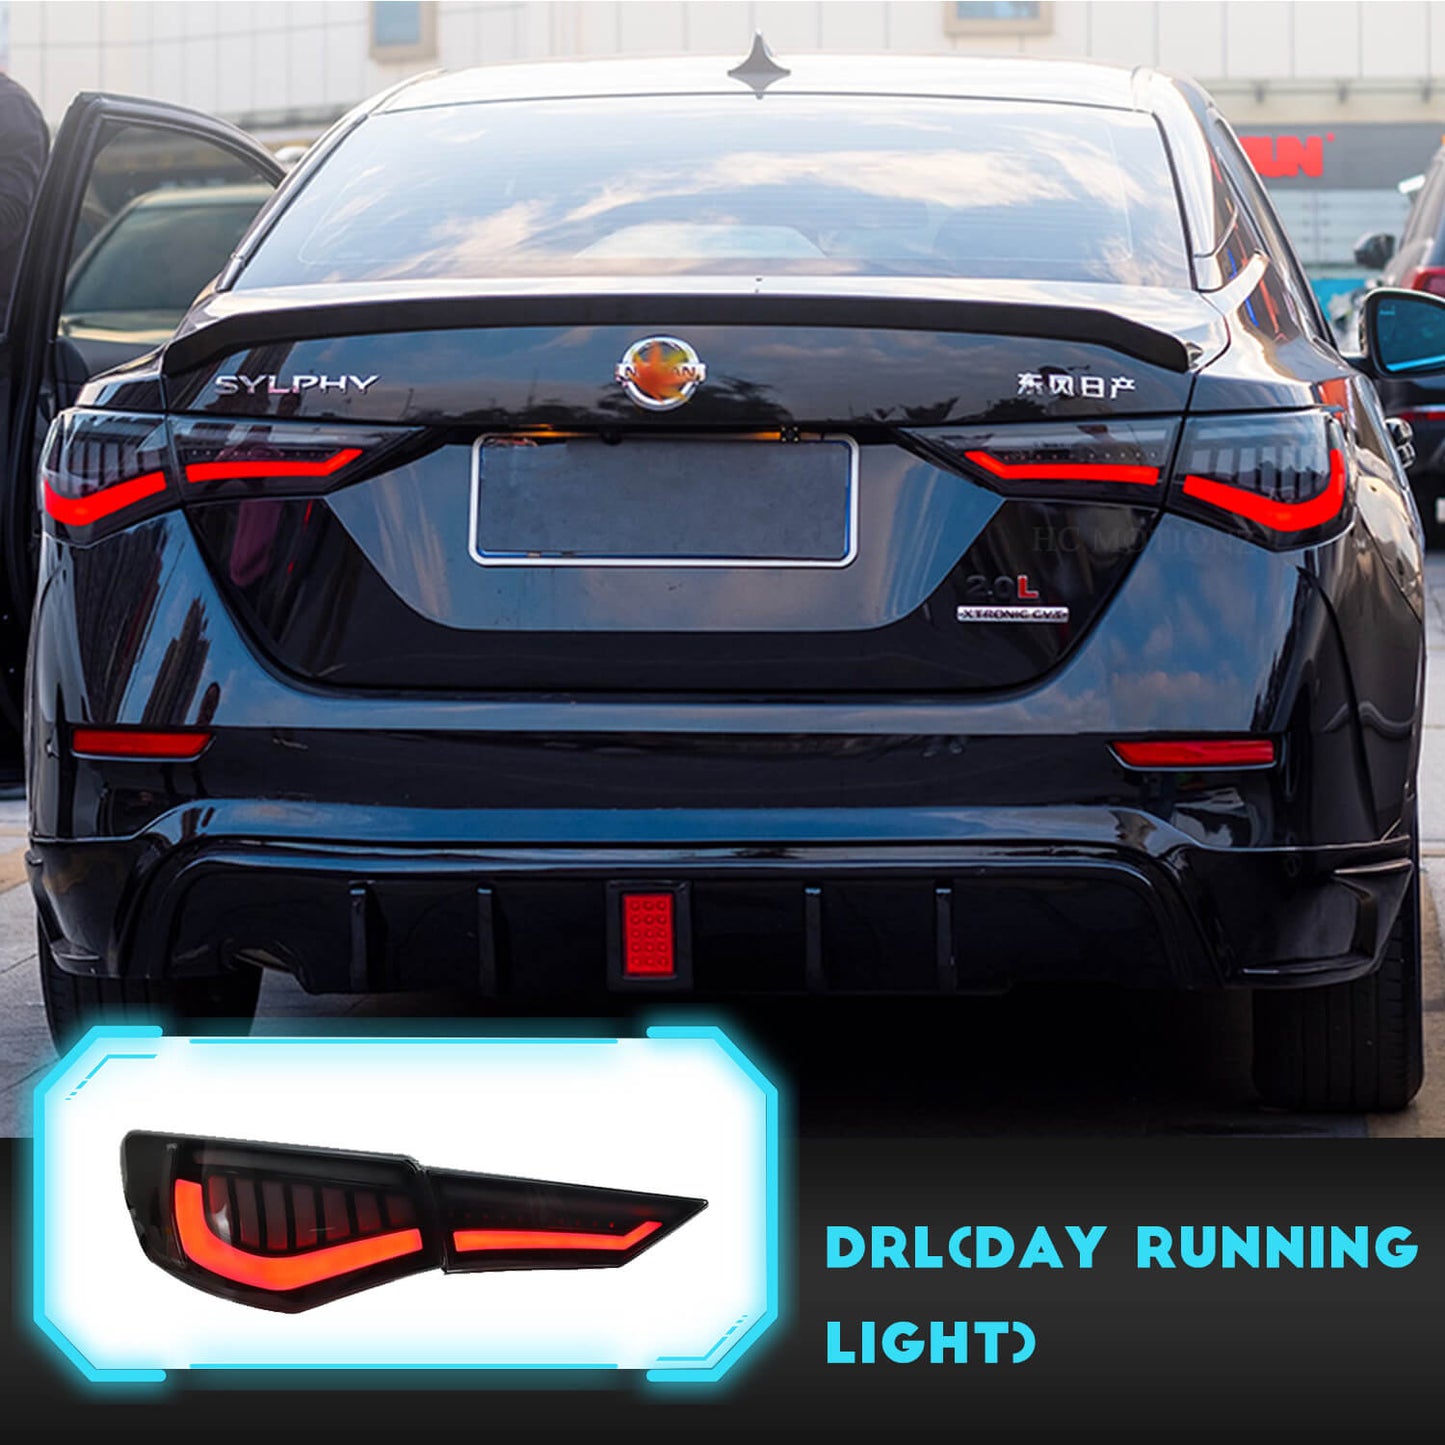 HCMOTION LED Tail Lights For Nissan Sylphy 19-22